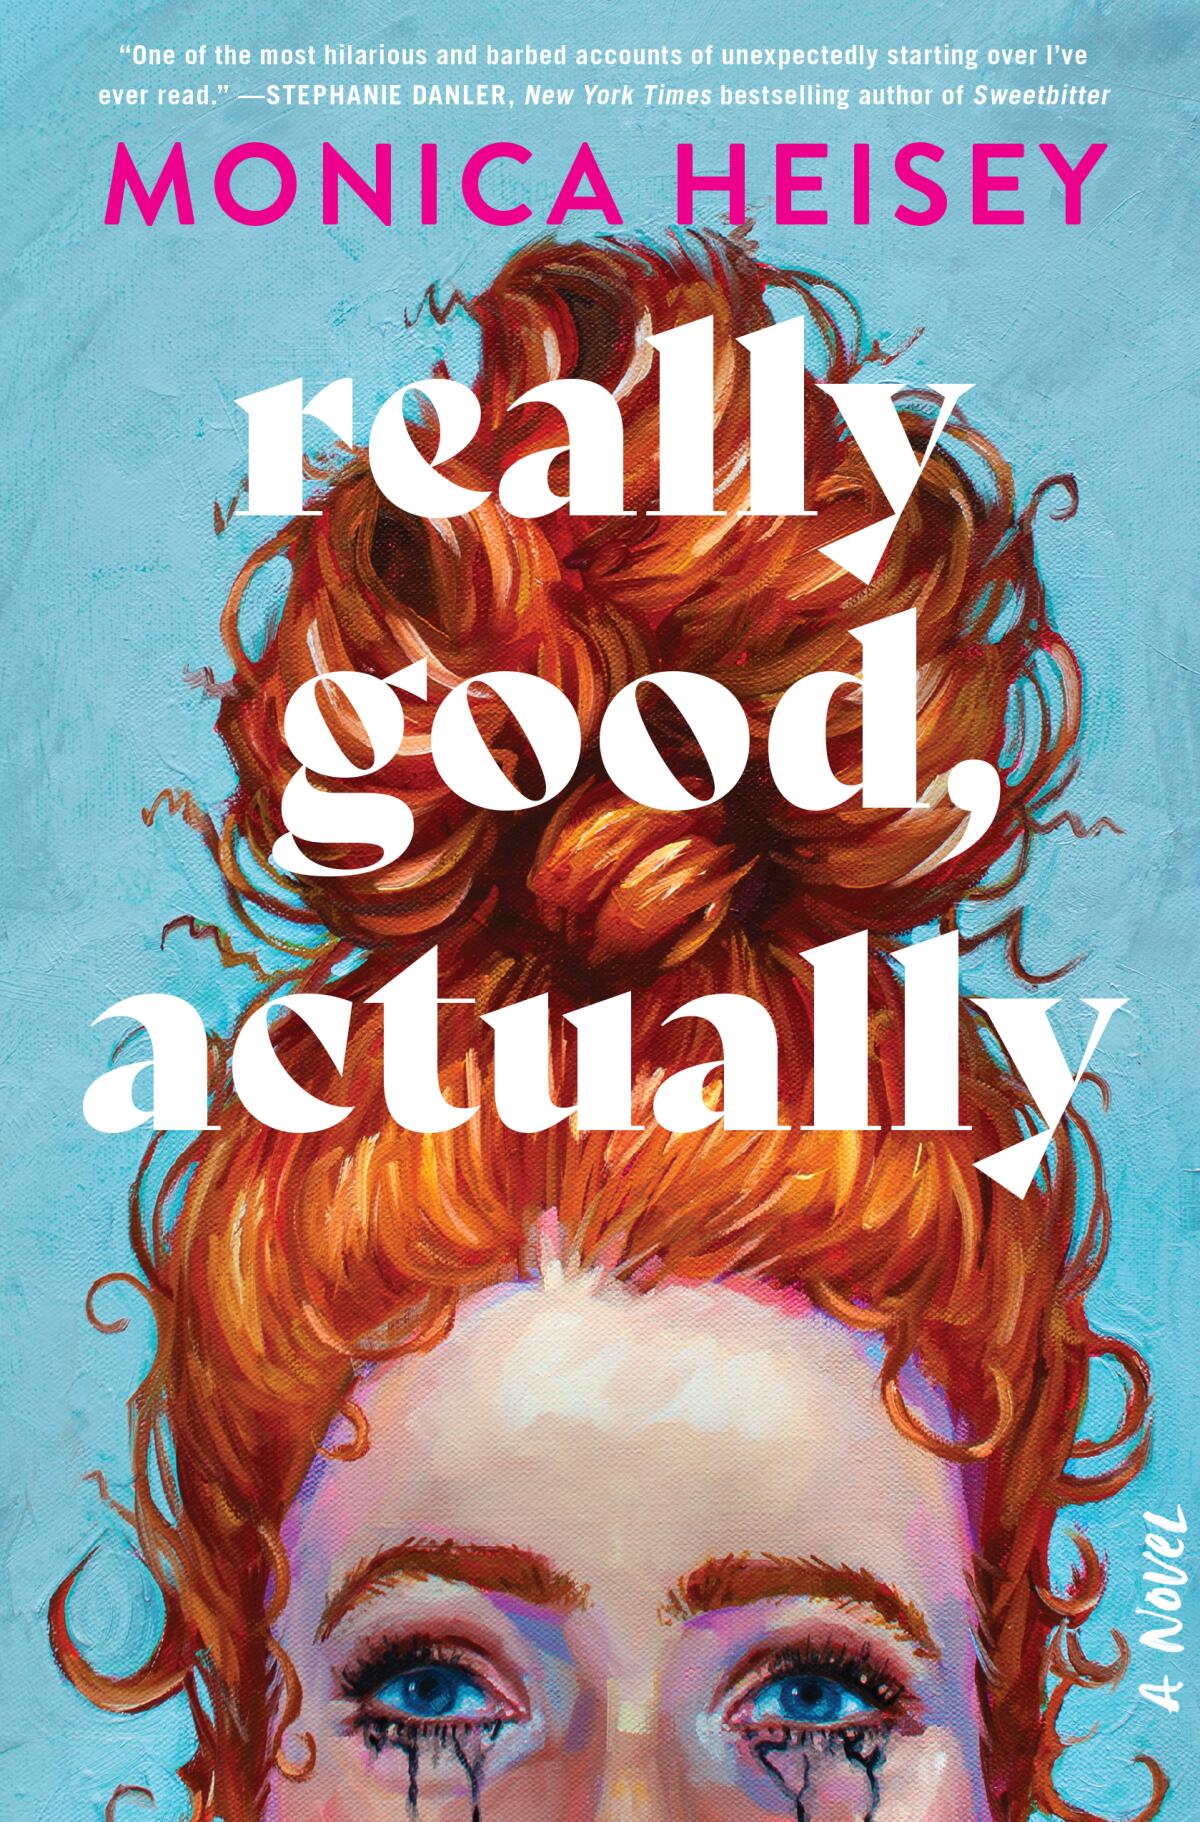 'Really Good, Actually,' by Monica Heisey